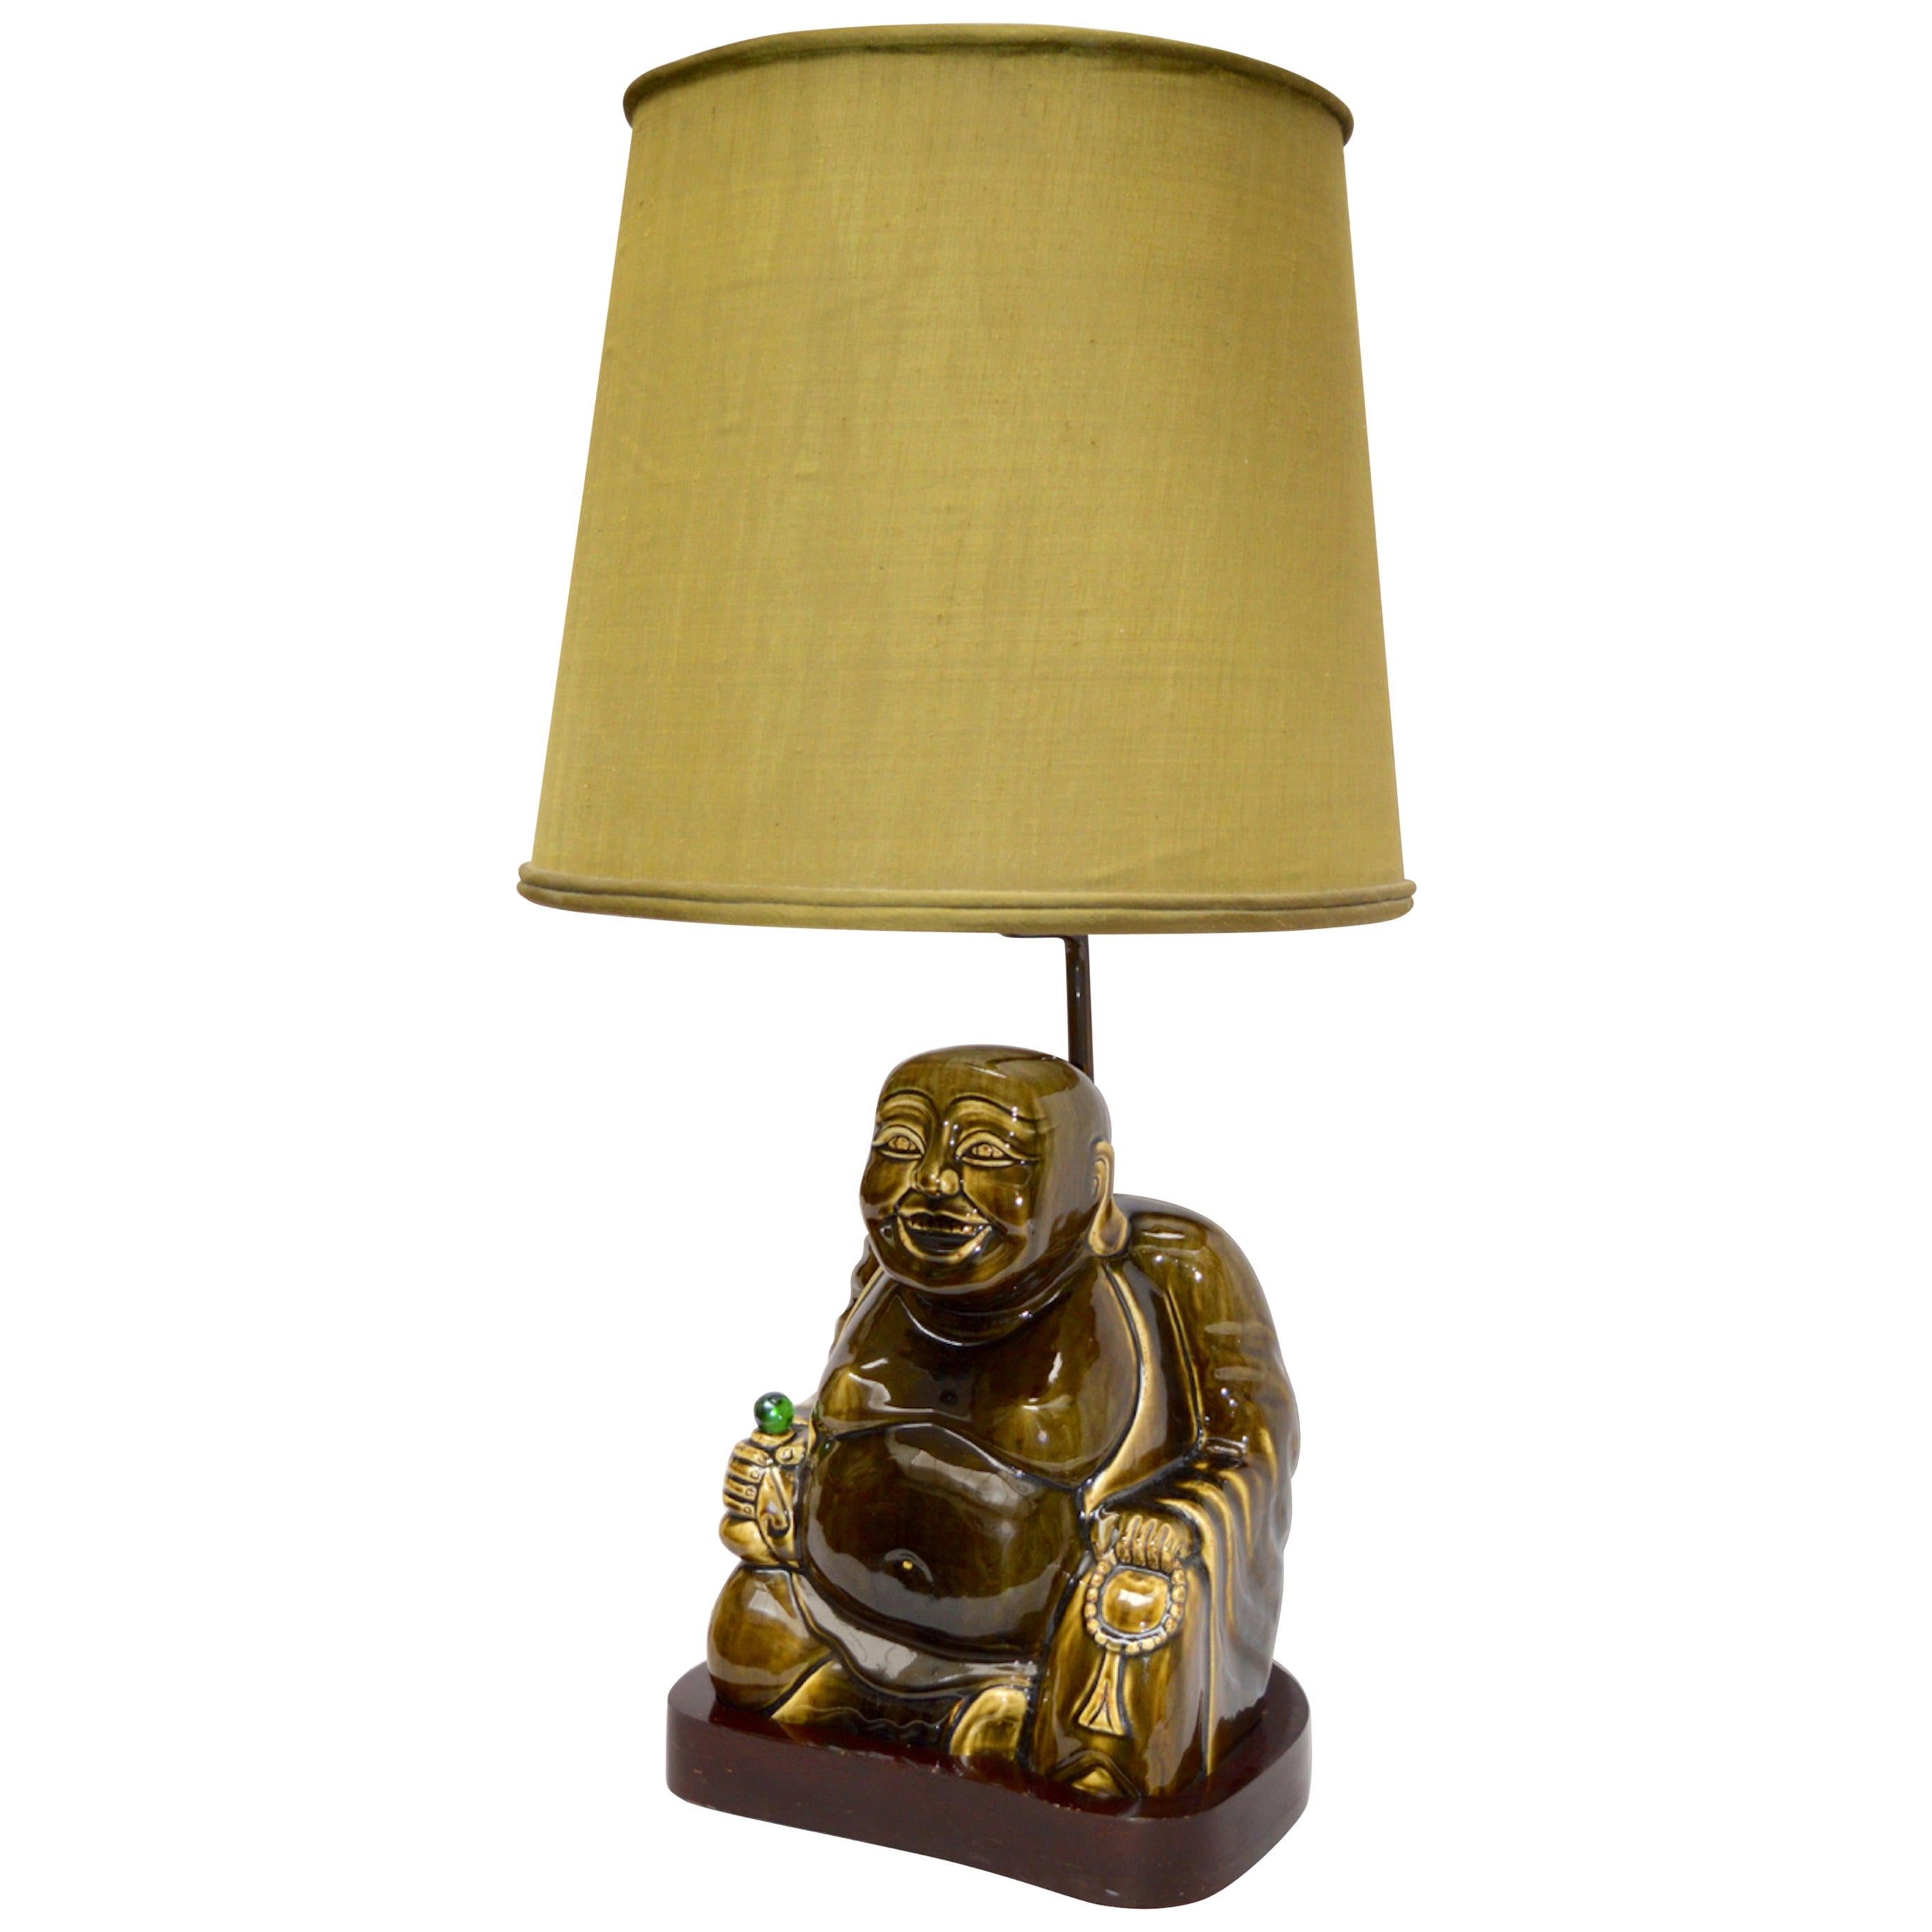 Midcentury Jade Green Porcelain Buddha Table Lamp in the Style of James Mont For Sale